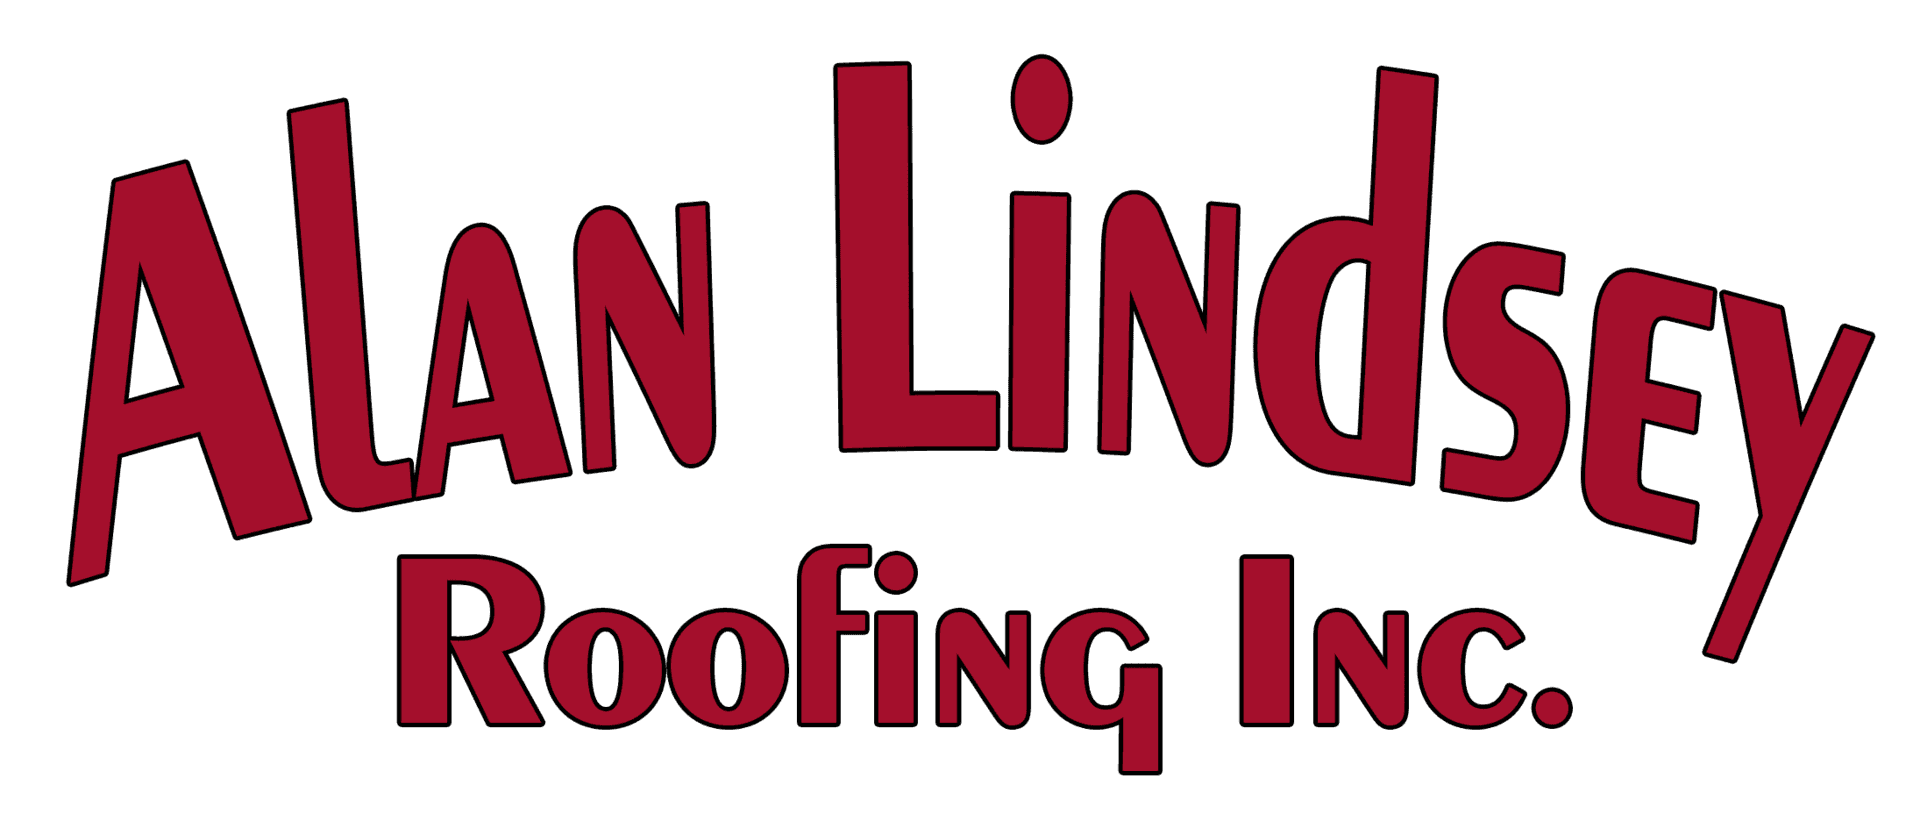 Roof Repair Replacement Contractor Ocala Fl Alan Lindsey Roofing Inc